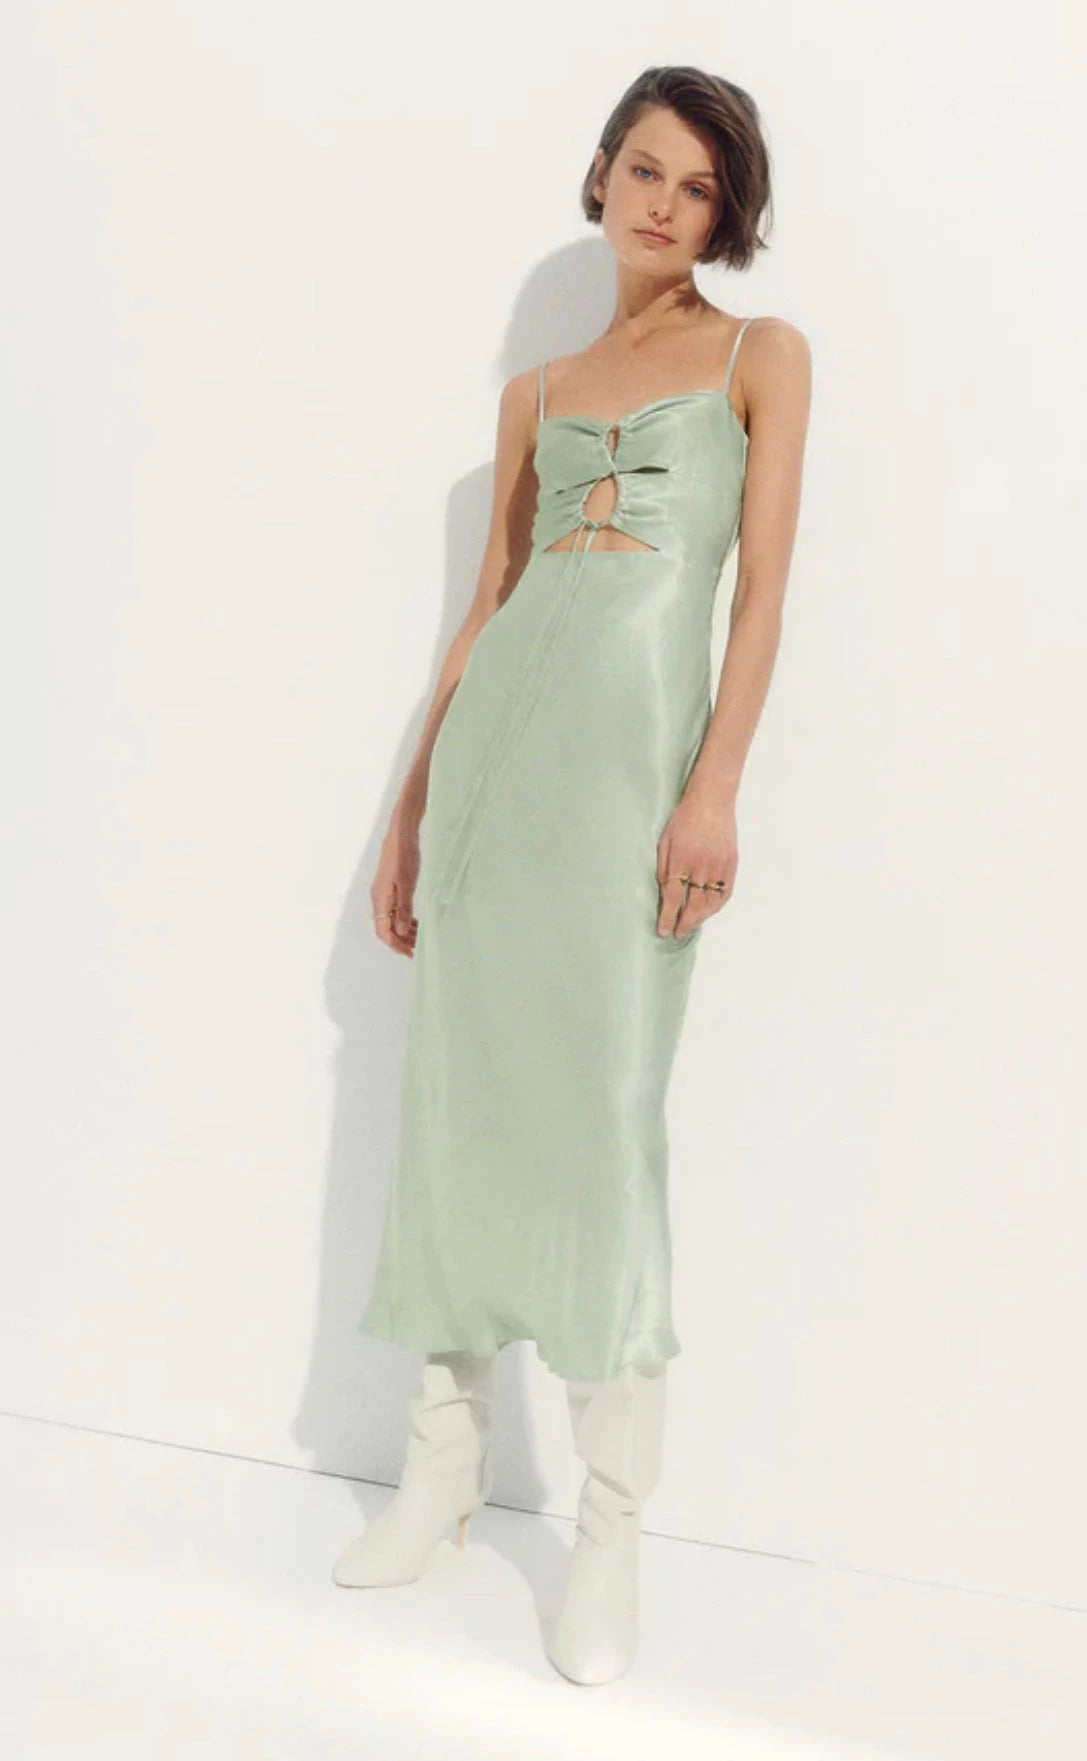 Shona Joy Felicity DRess in Thyme green full length view with model leaning against a white wall with white boots